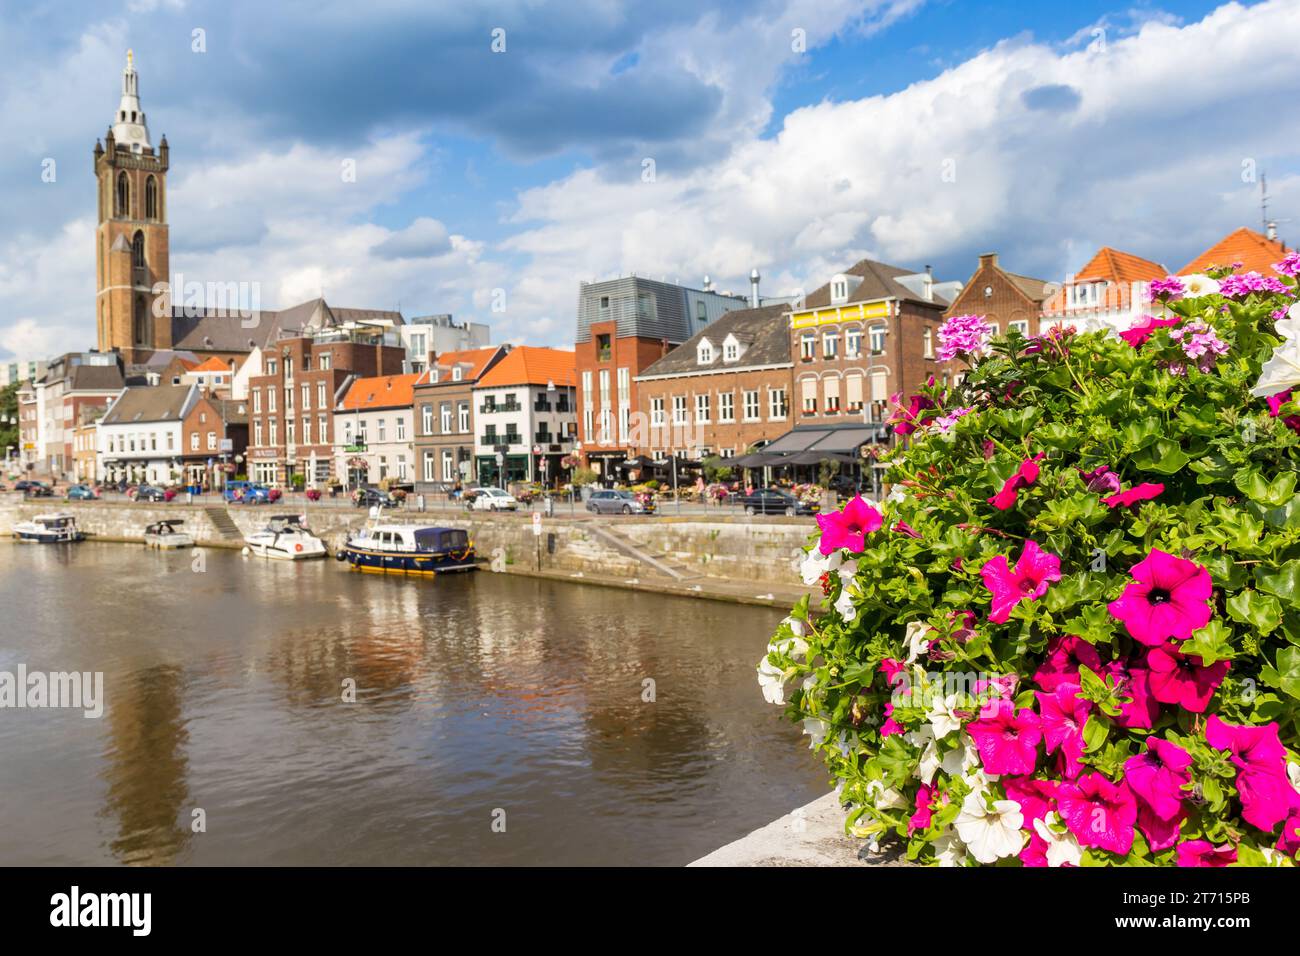 Colorful flowers on the historic bridge in Roermond, Netherlands Stock Photo